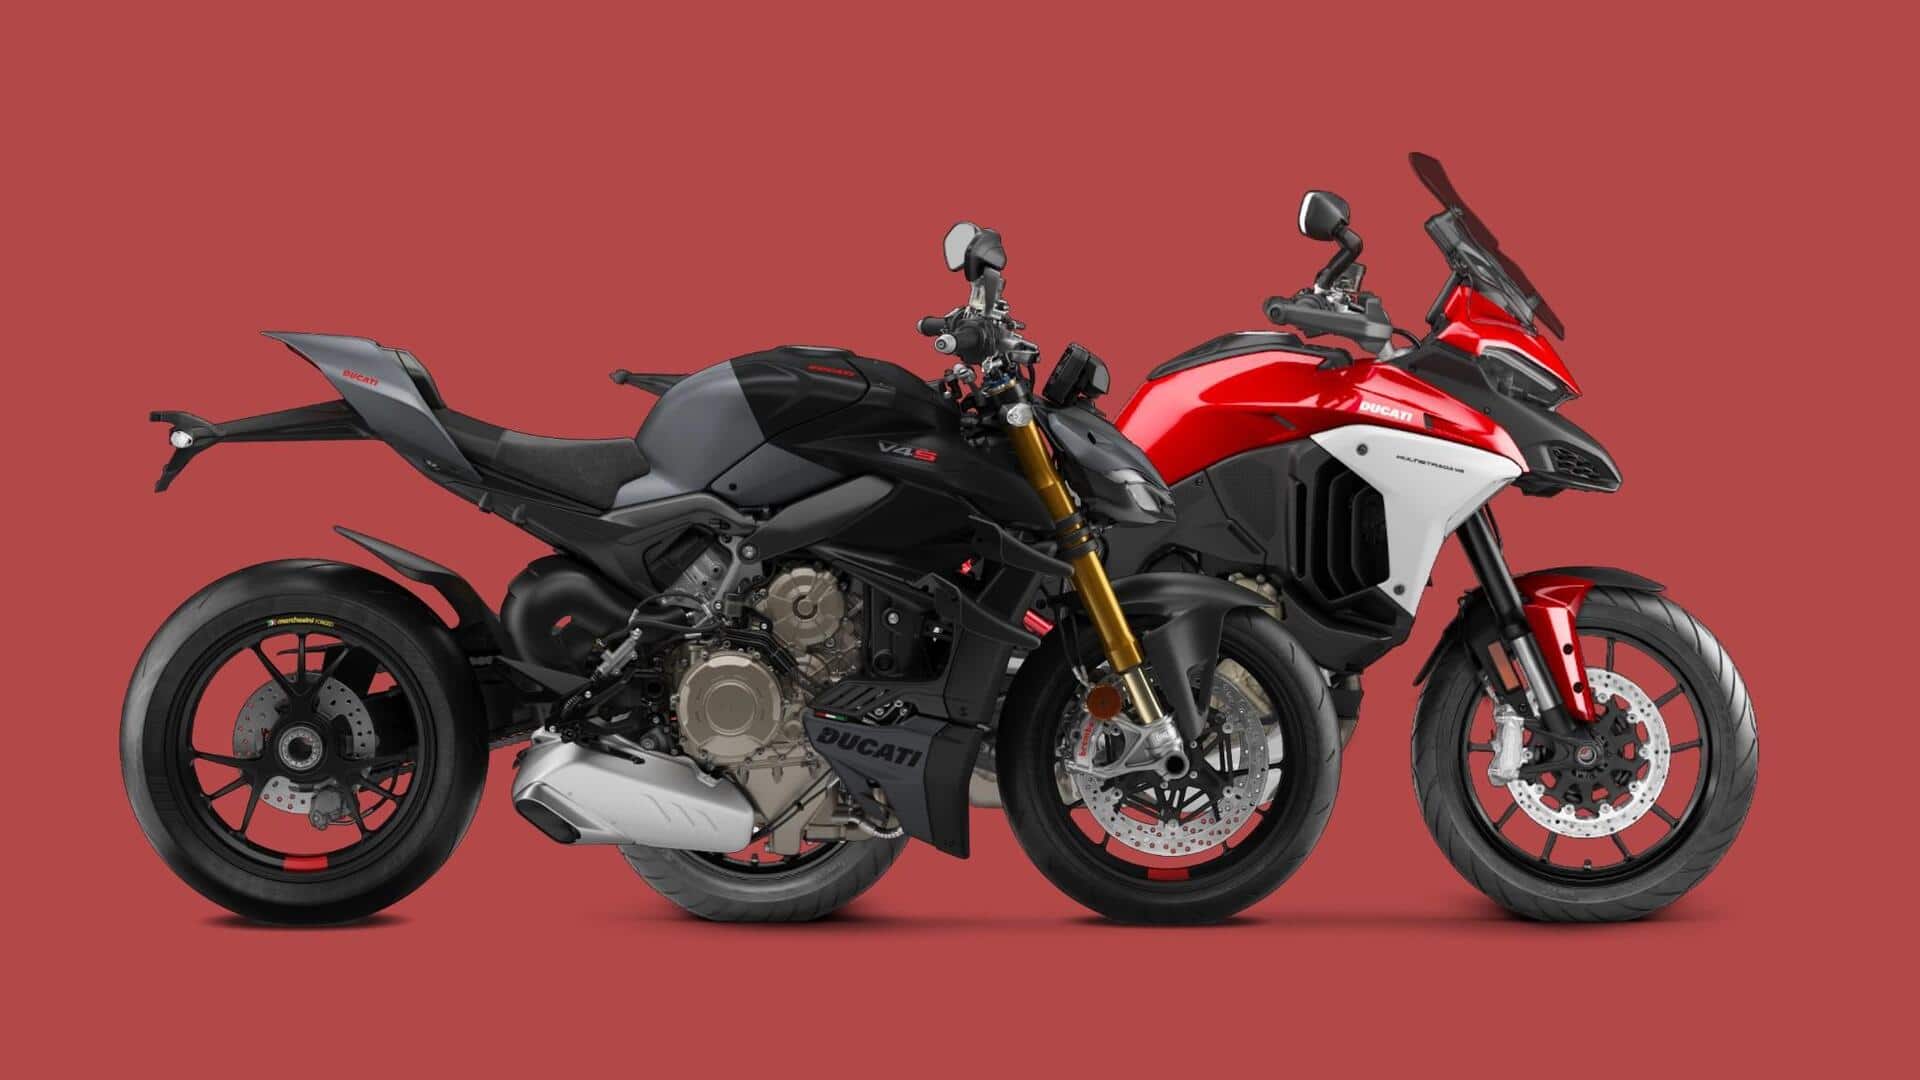 Attractive benefits worth Rs. 1.5 lakh on select Ducati motorcycles